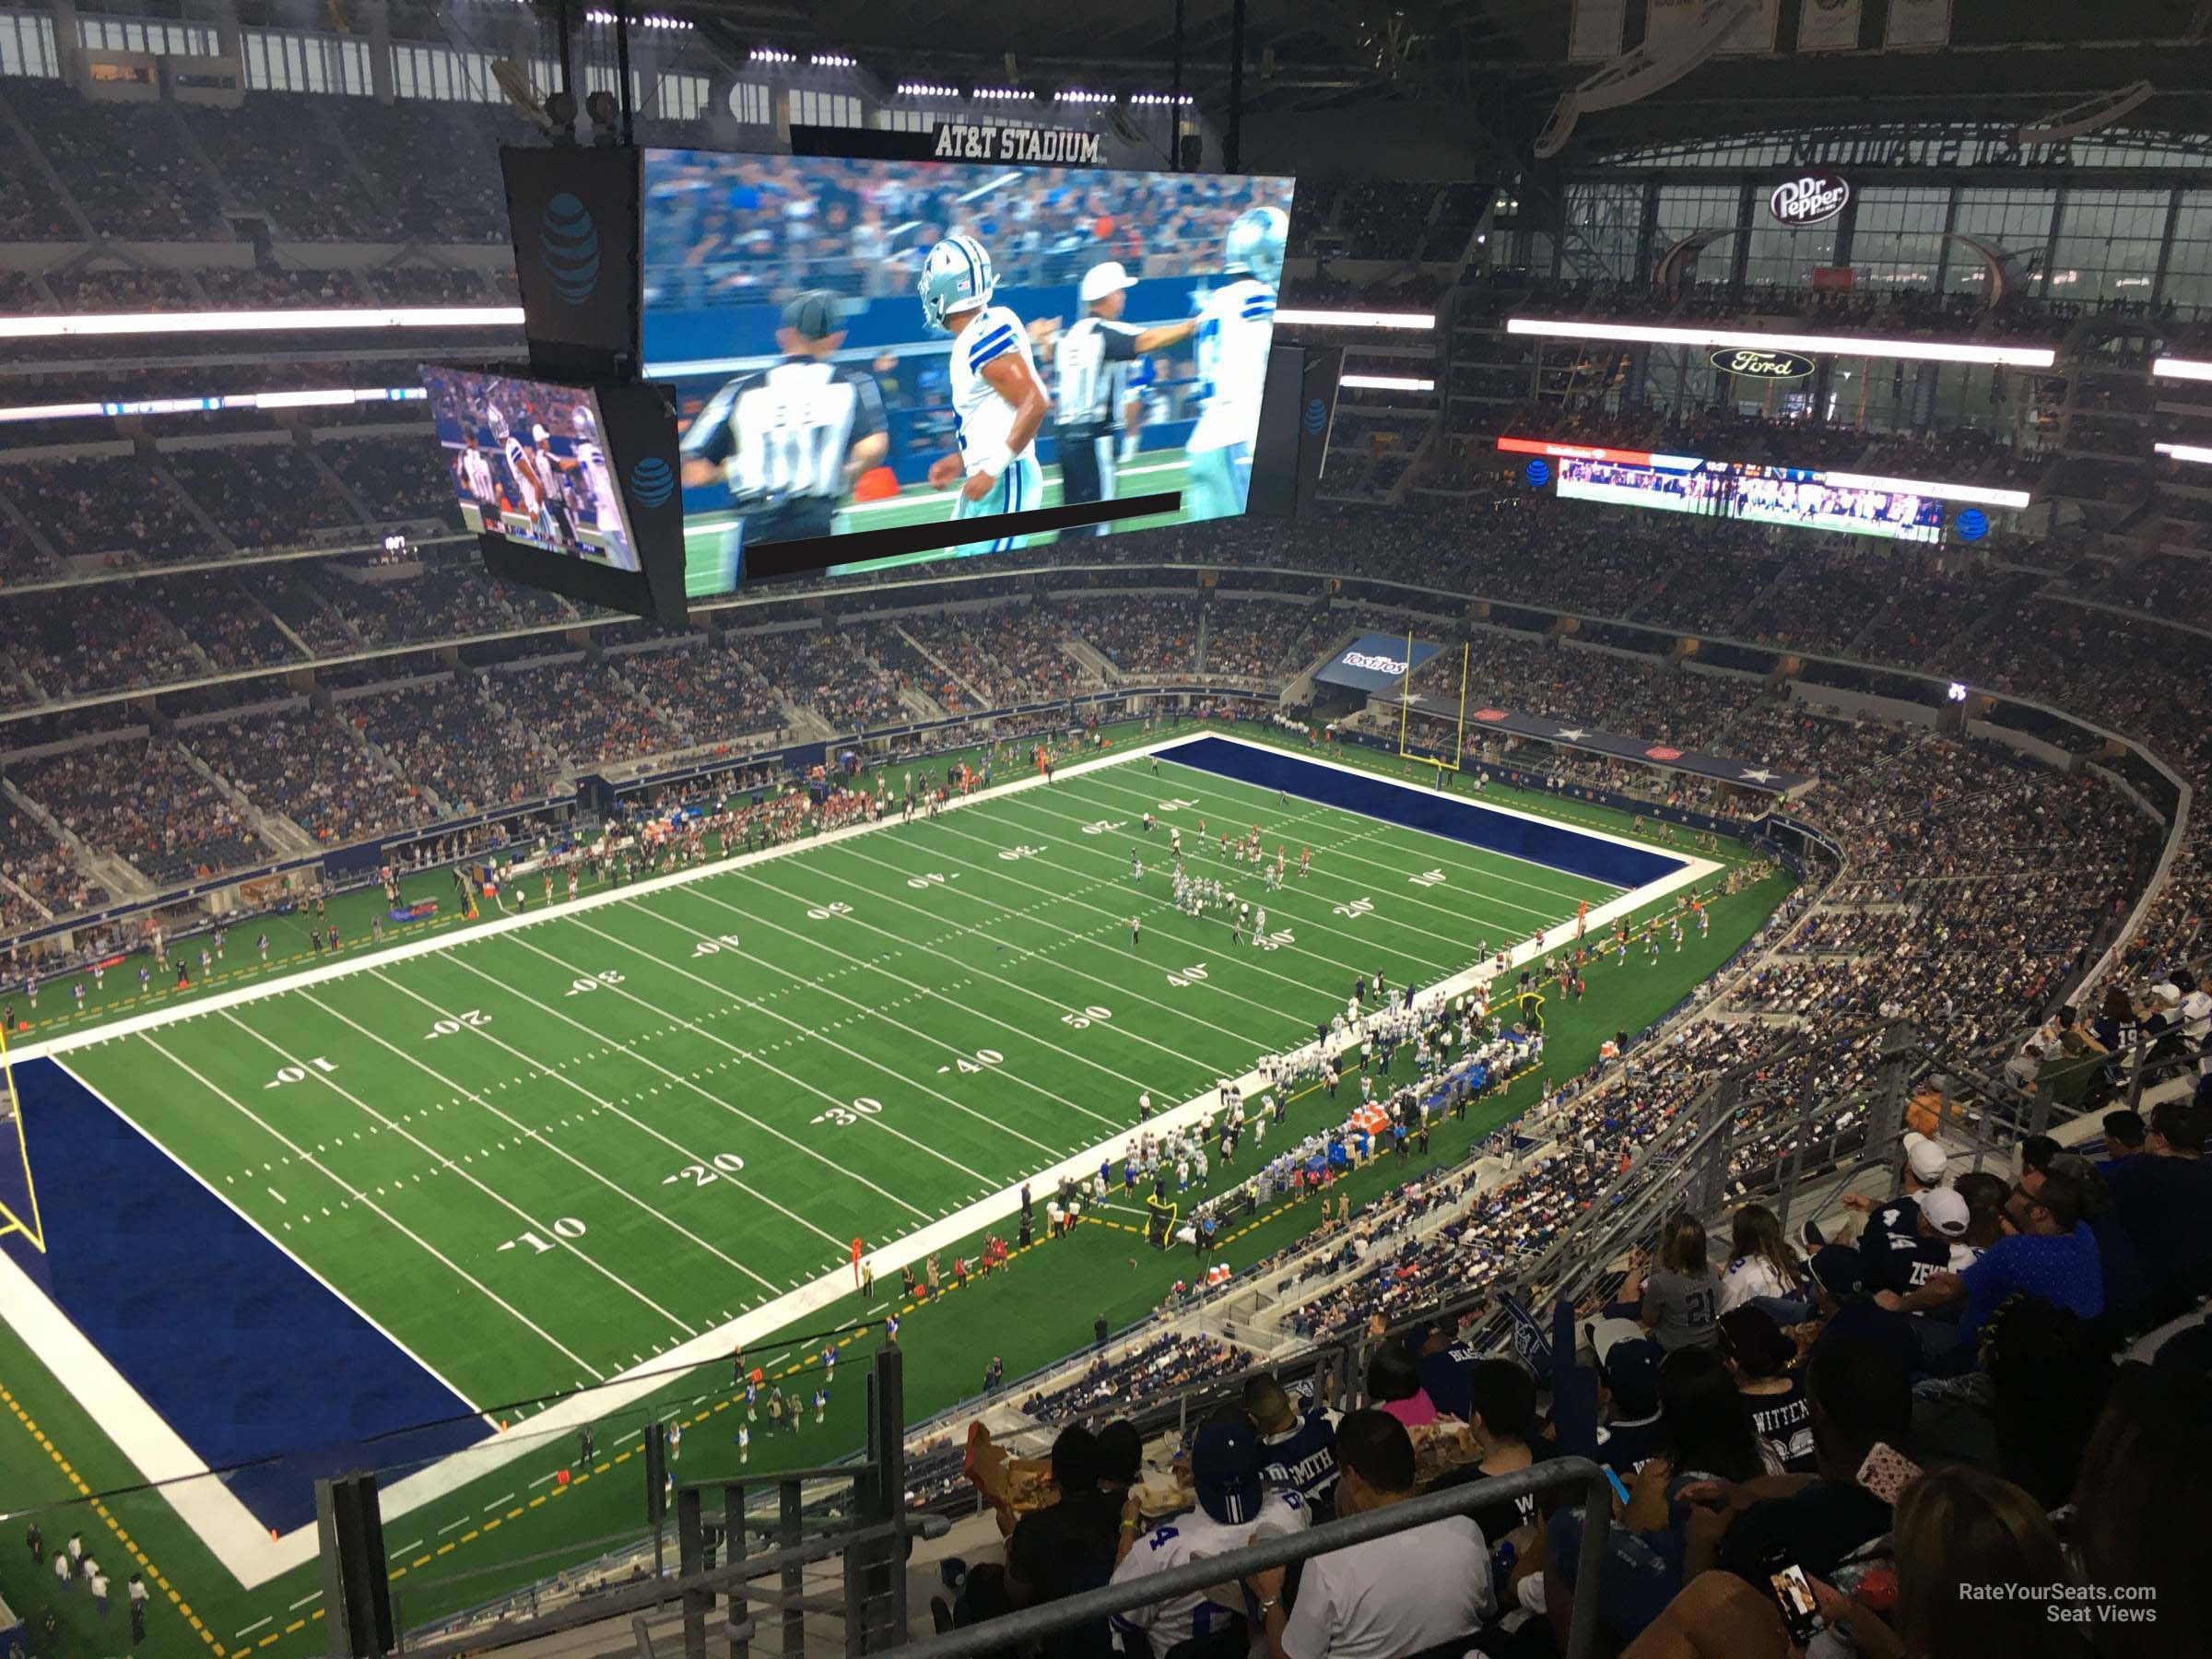 section 420, row 22 seat view  for football - at&t stadium (cowboys stadium)